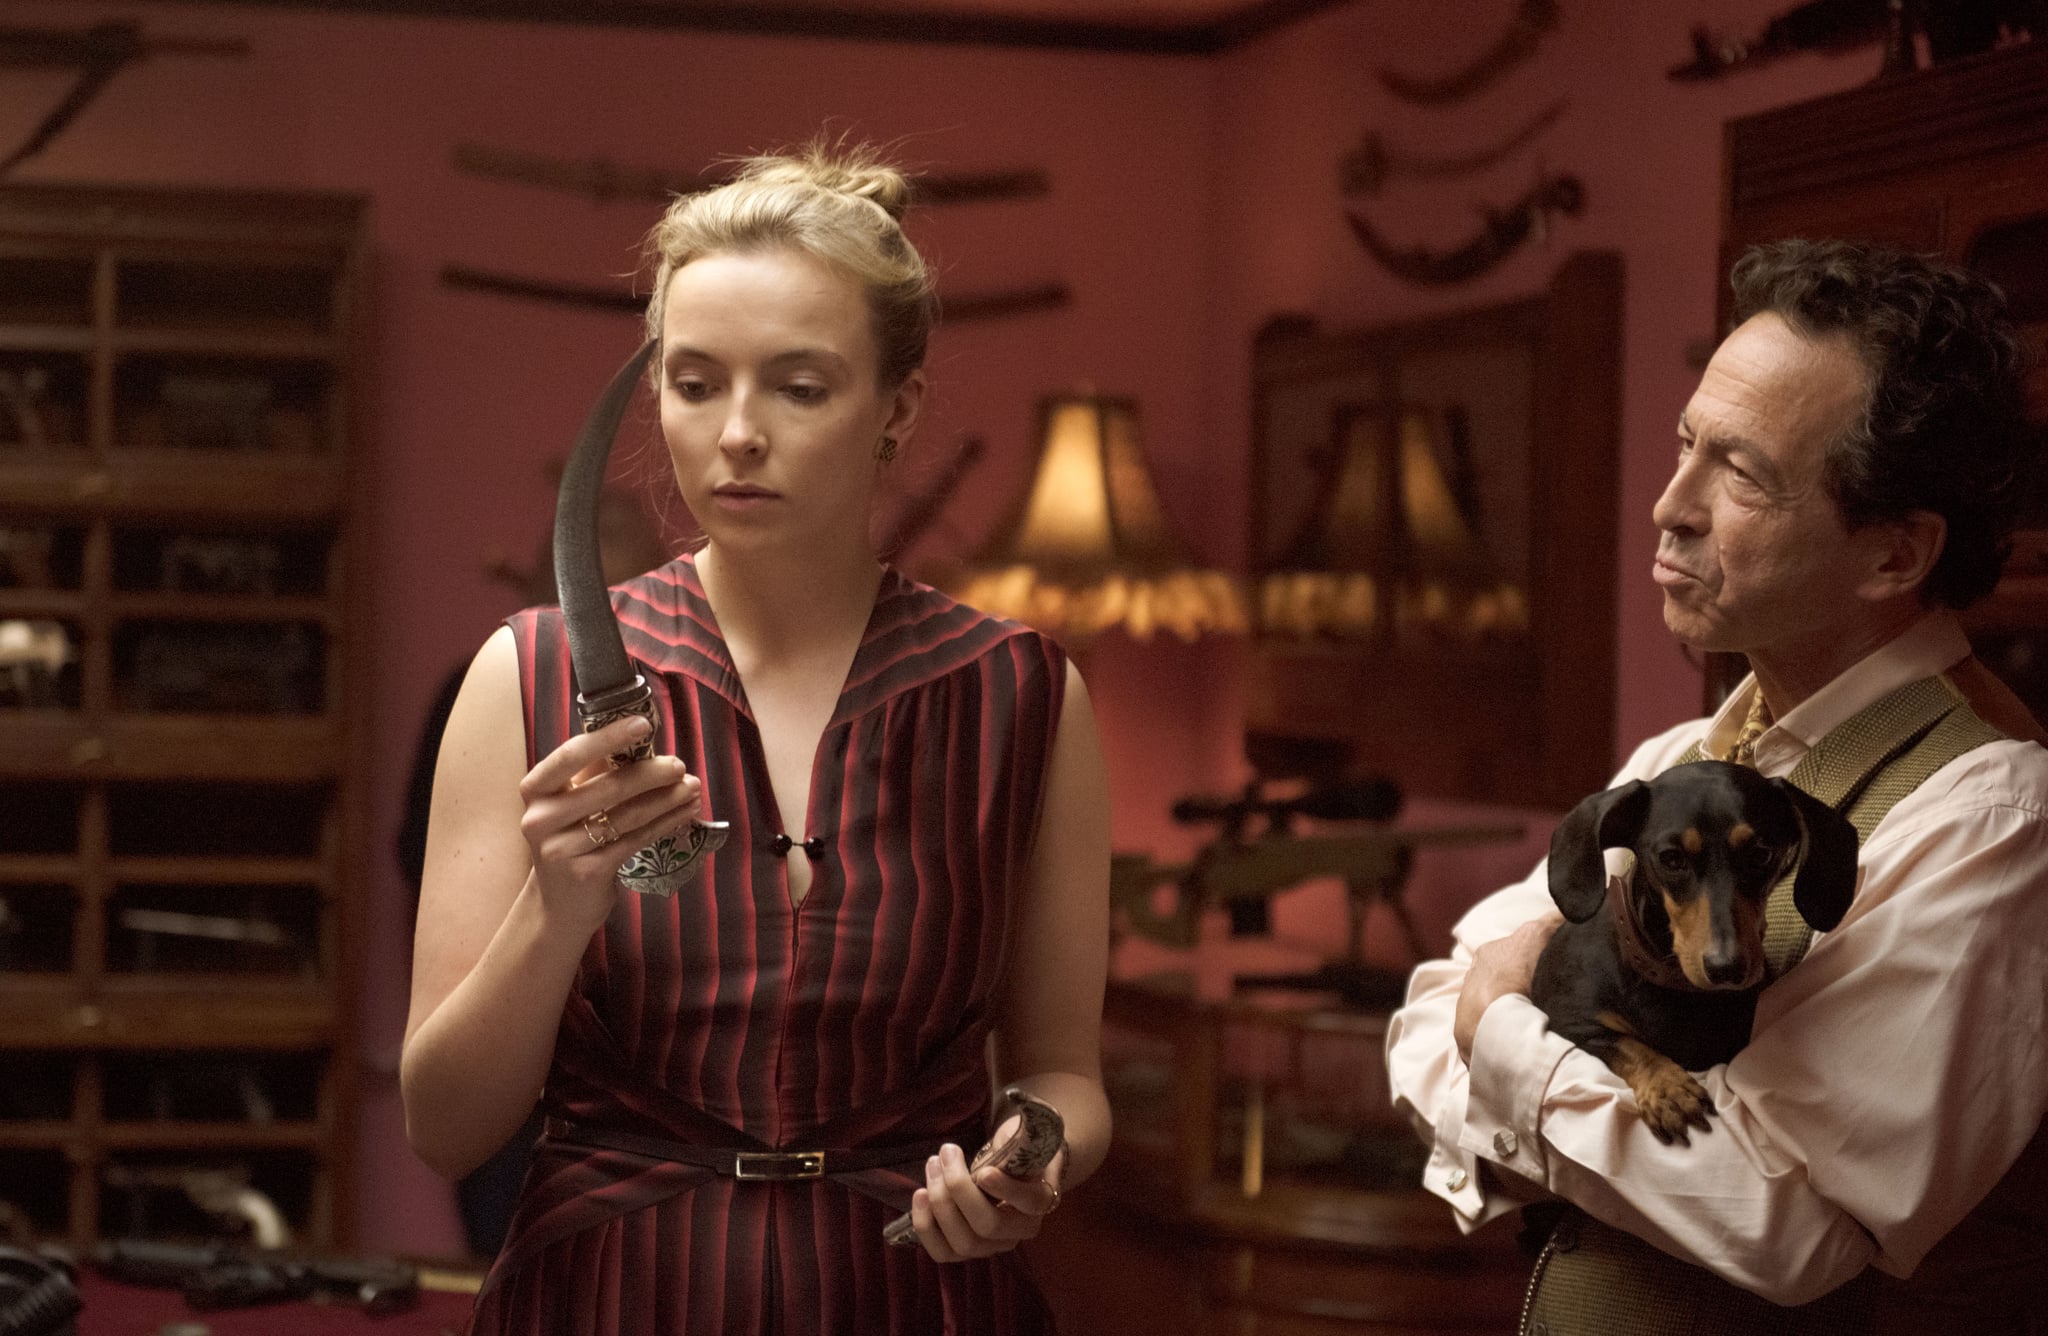 KILLING EVE, from left: Jodie Comer, Andy Secombe, 'Smell Ya Later', (Season 2, ep. 205, aired May 5, 2019). photo: Parisa Taghizadeh / BBC-America / Courtesy: Everett Collection